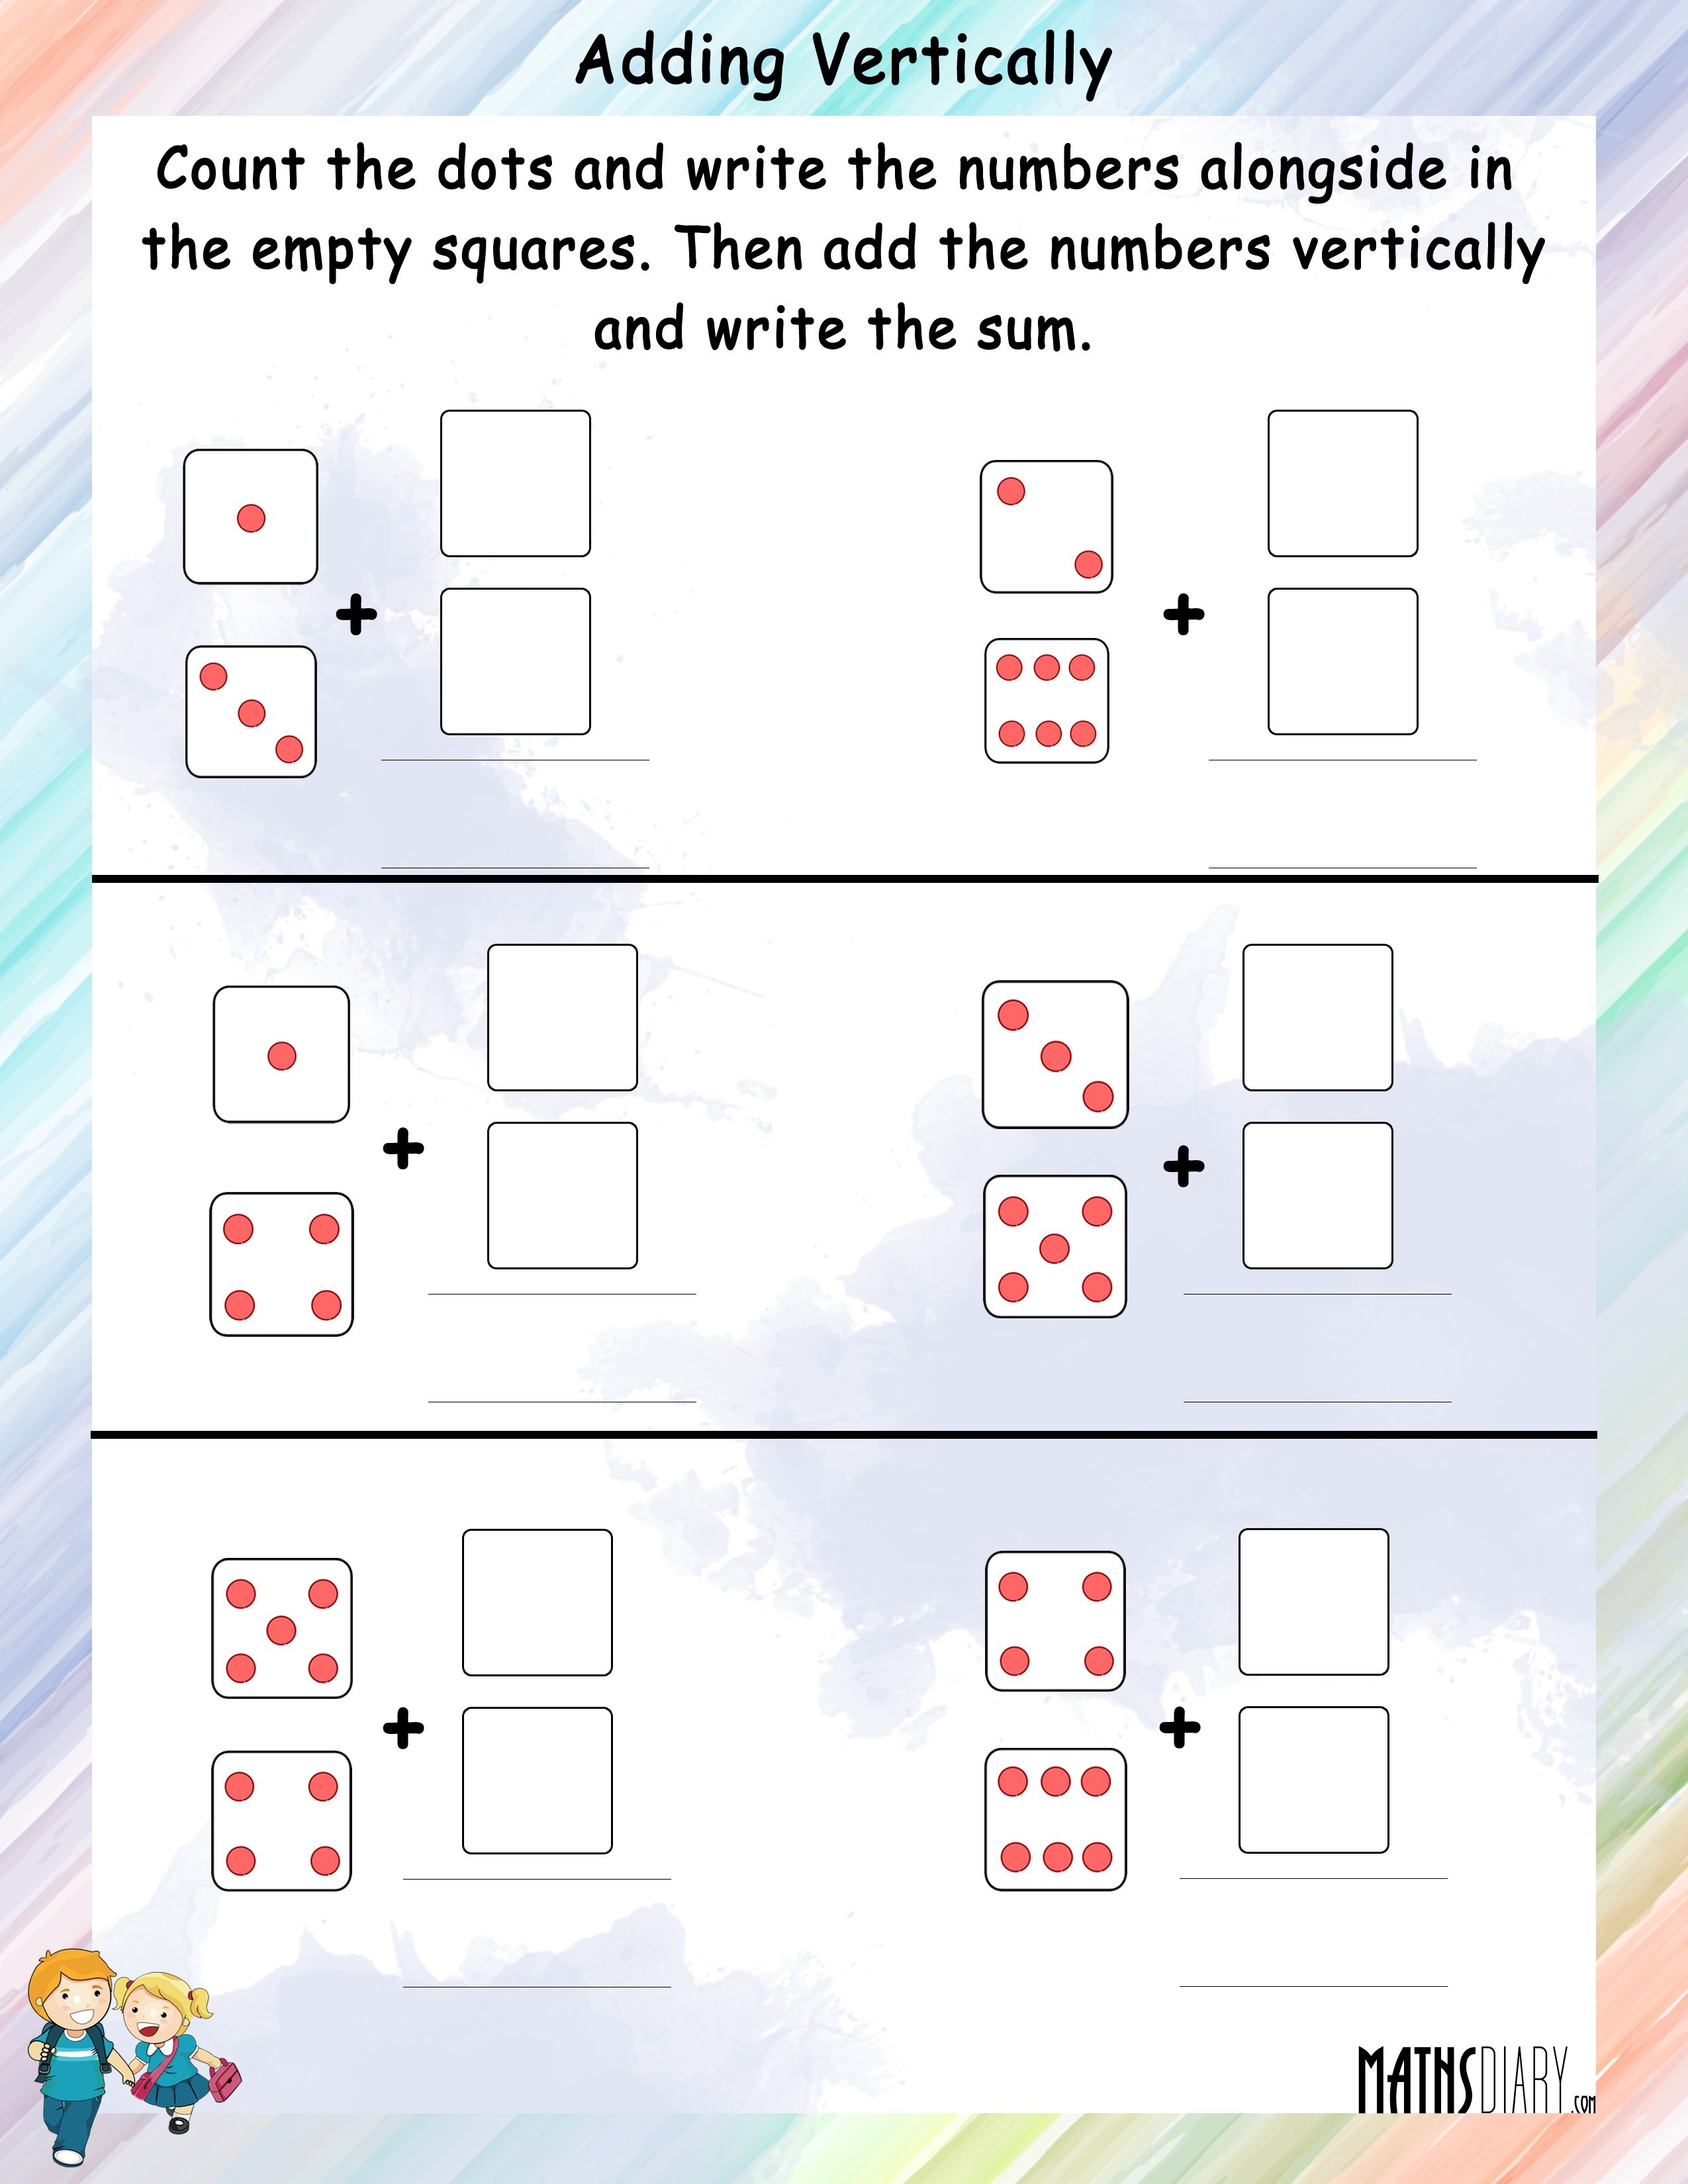 adding-vertically-vertical-addition-math-worksheets-mathsdiary